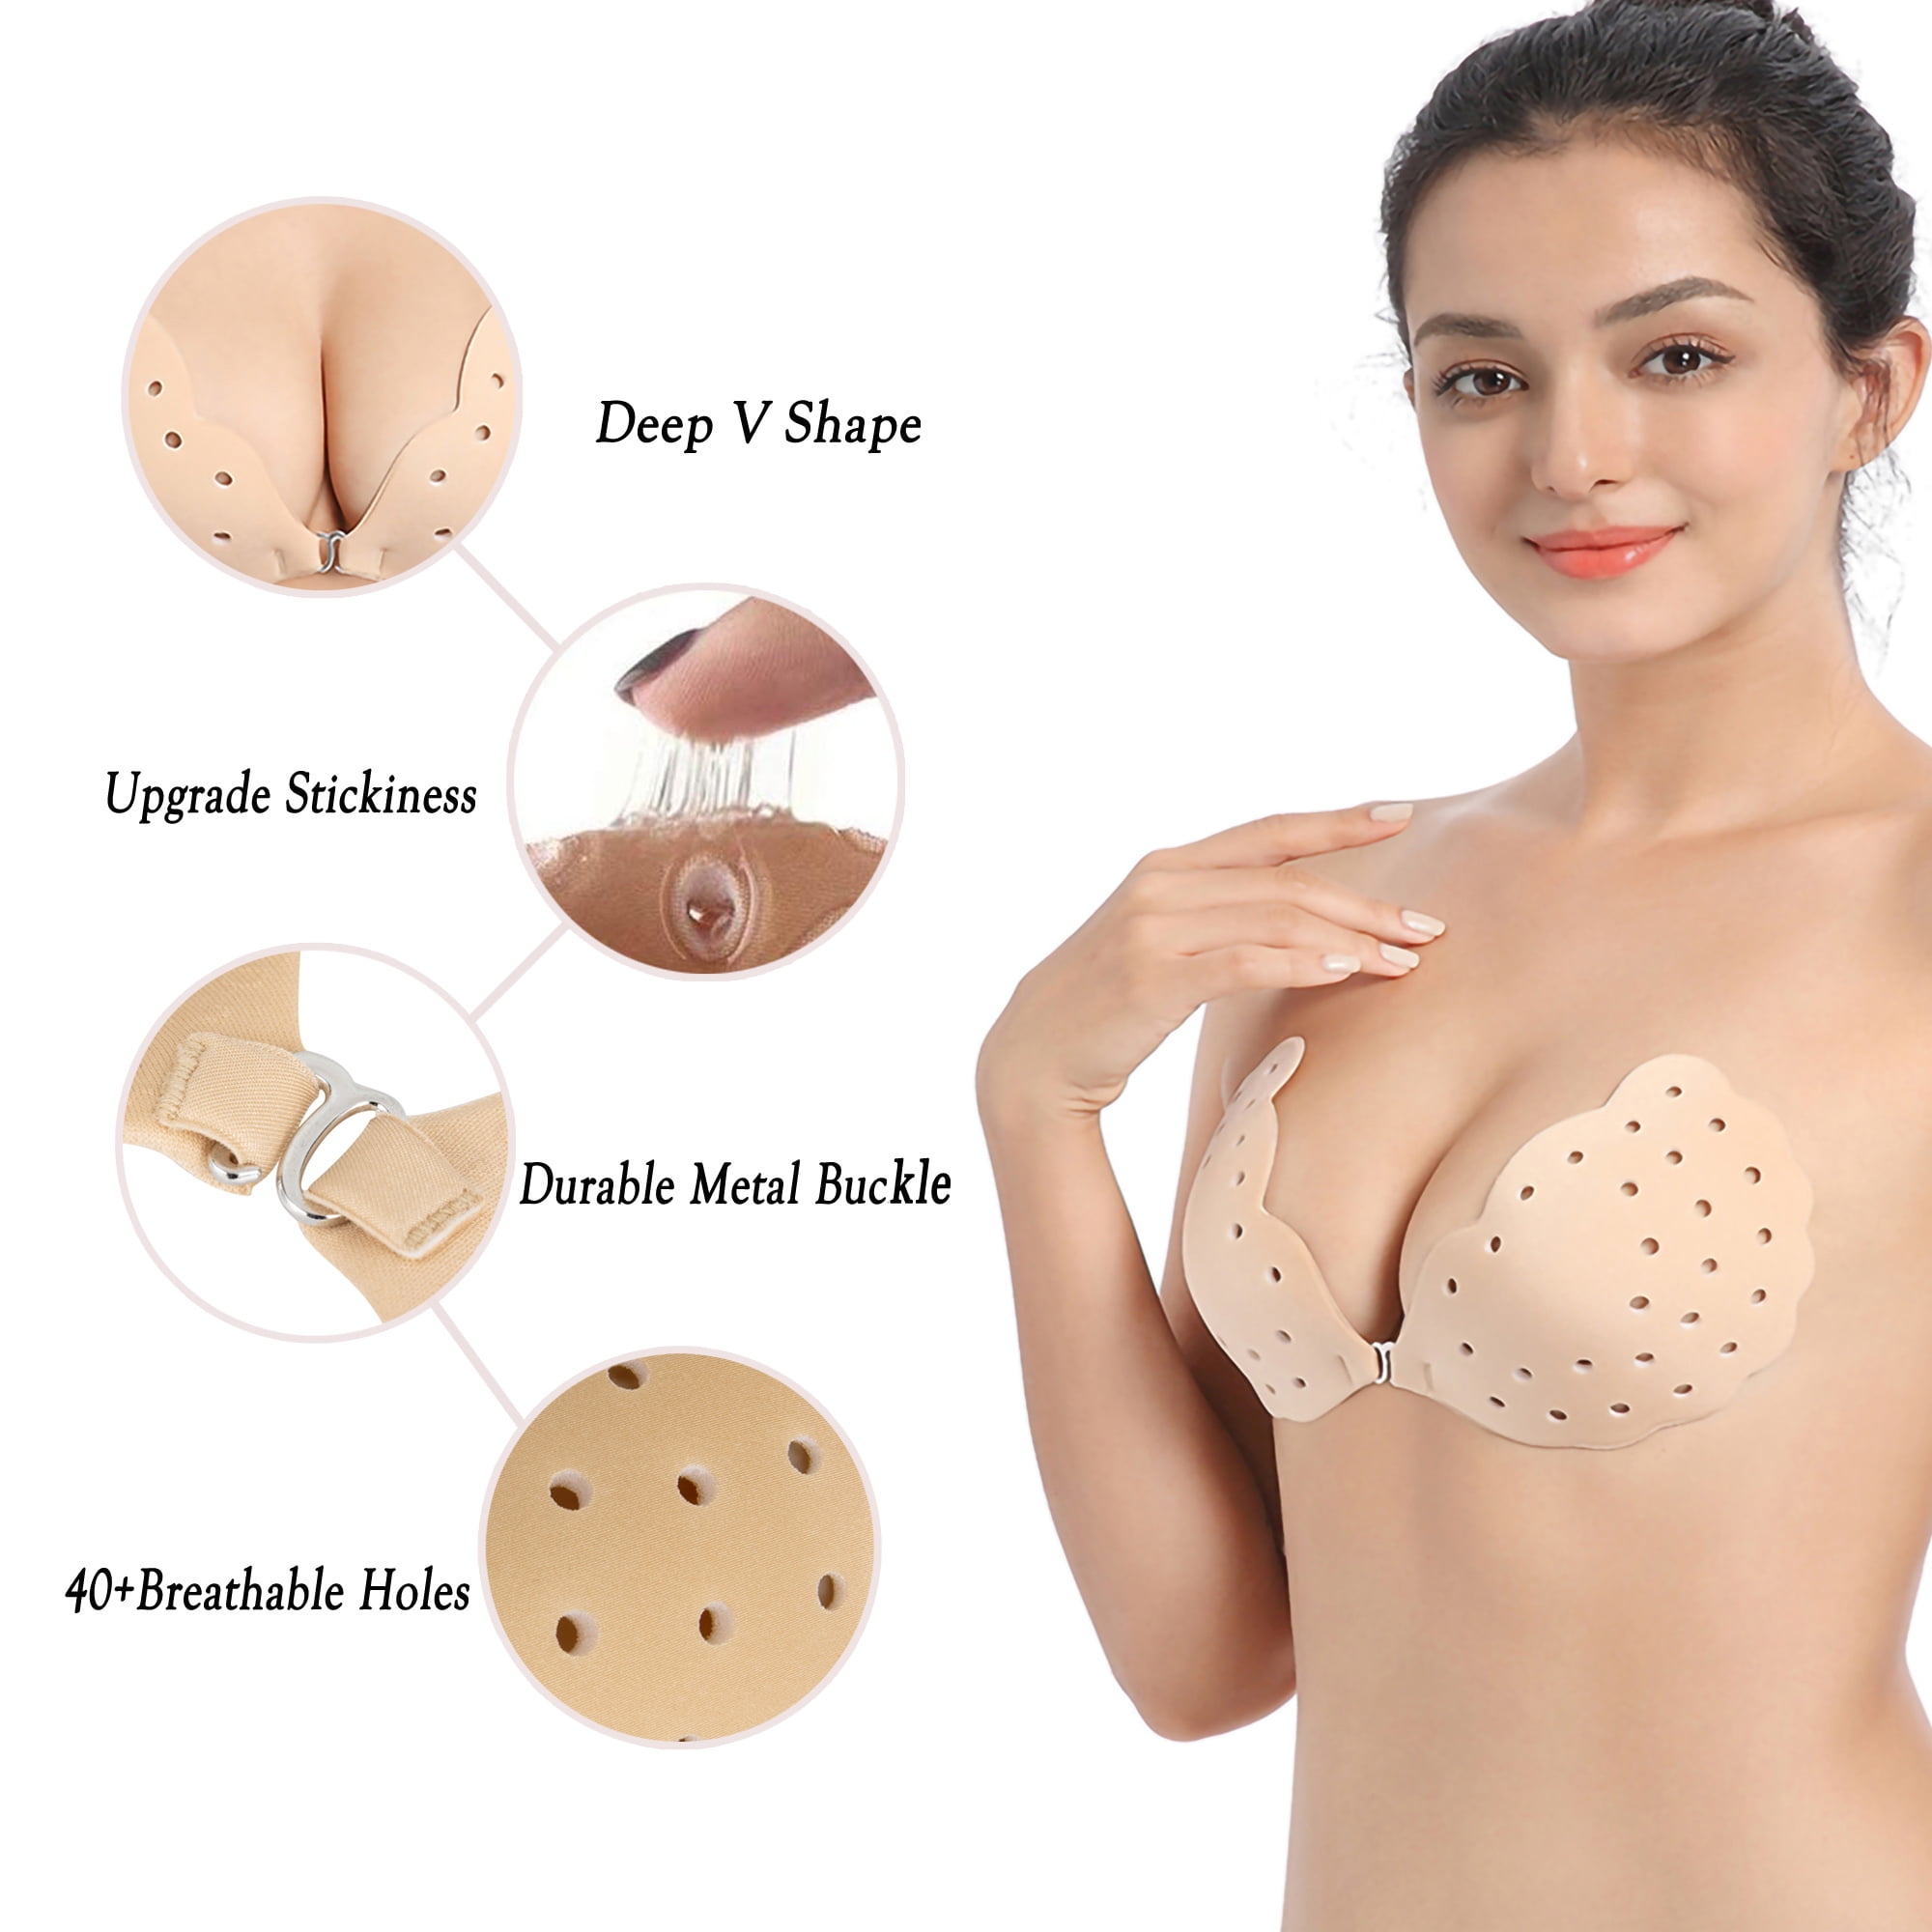 Boobs Linewomen's Silicone Bra Push-up Patch - Adjustable, Anti